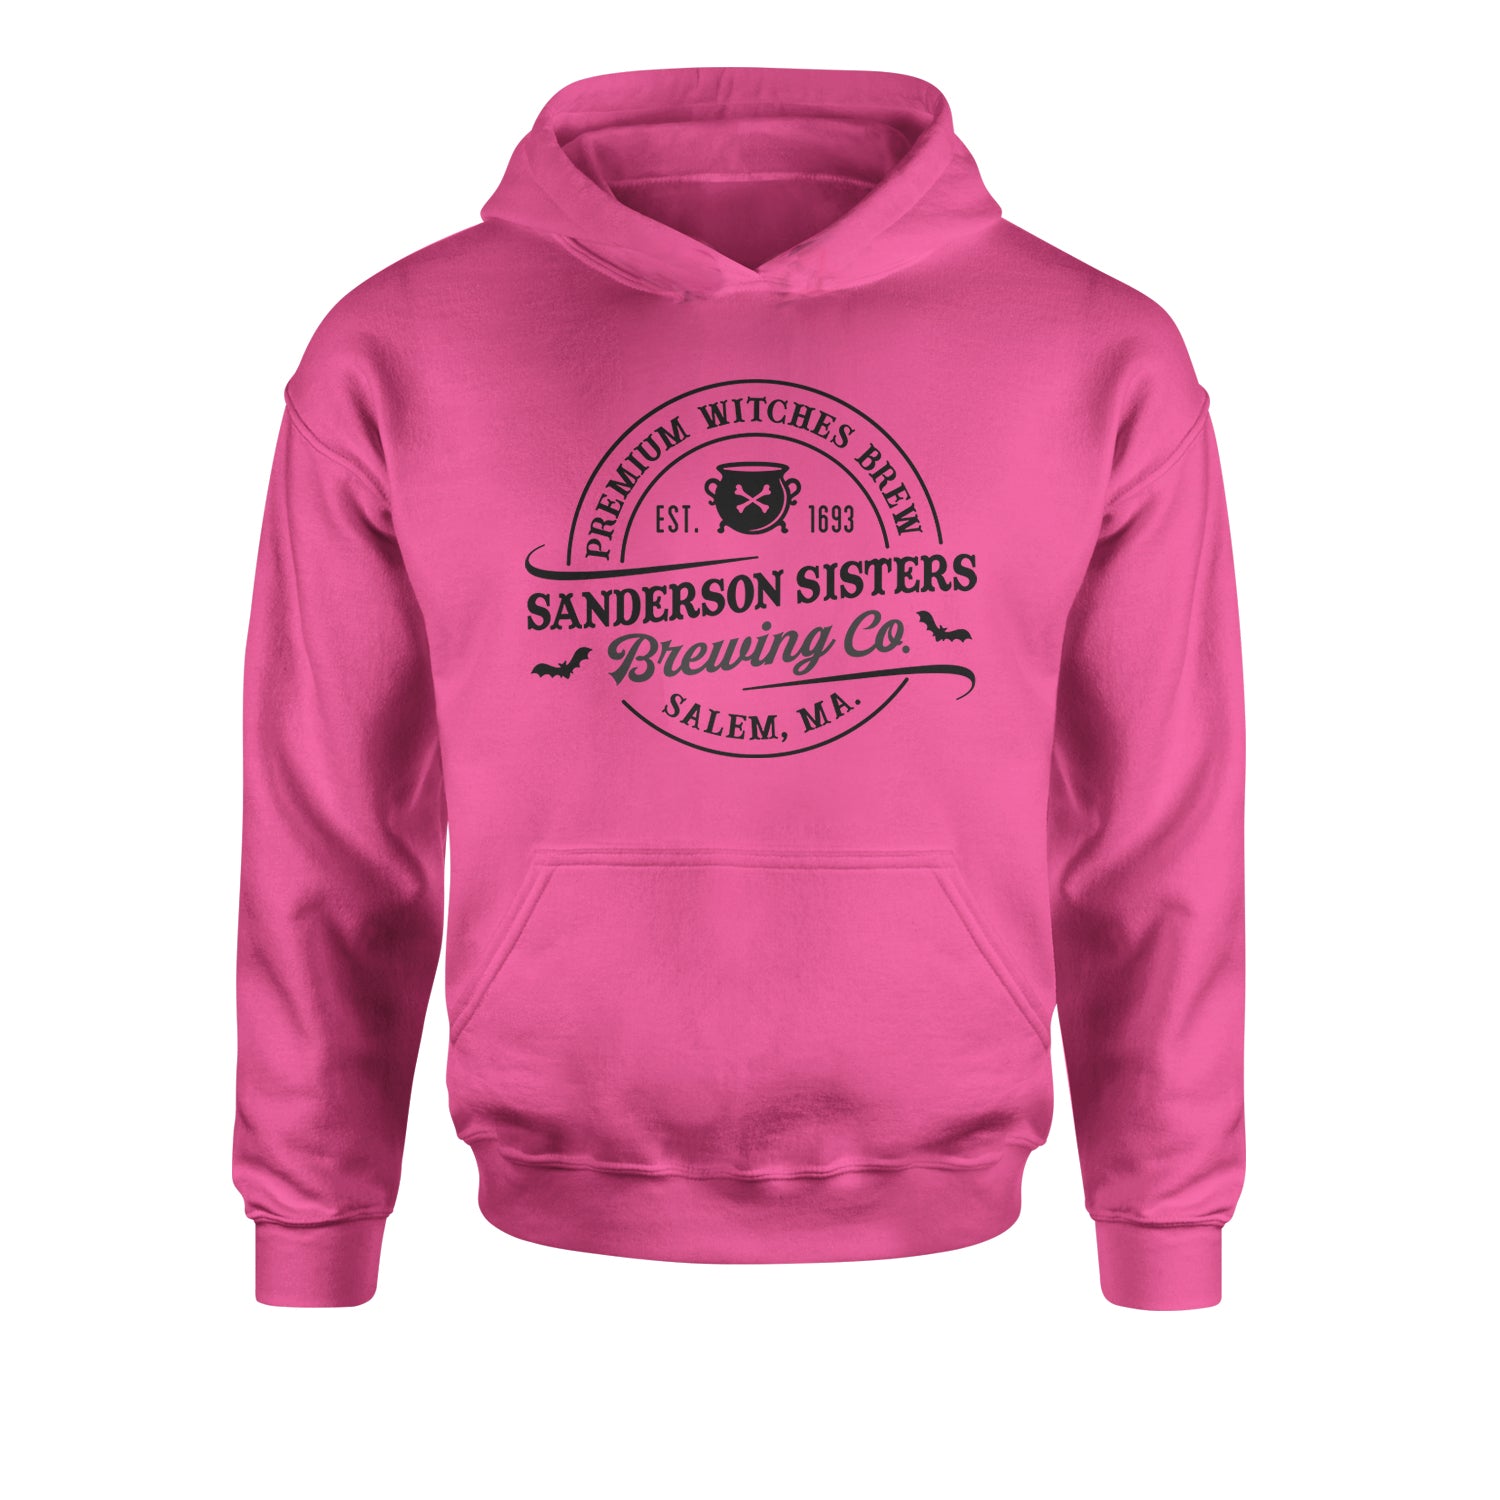 Sanderson Sisters Brewing Company Witches Brew Youth-Sized Hoodie descendants, enchanted, eve, hallows, hocus, or, pocus, sanderson, sisters, treat, trick, witches by Expression Tees